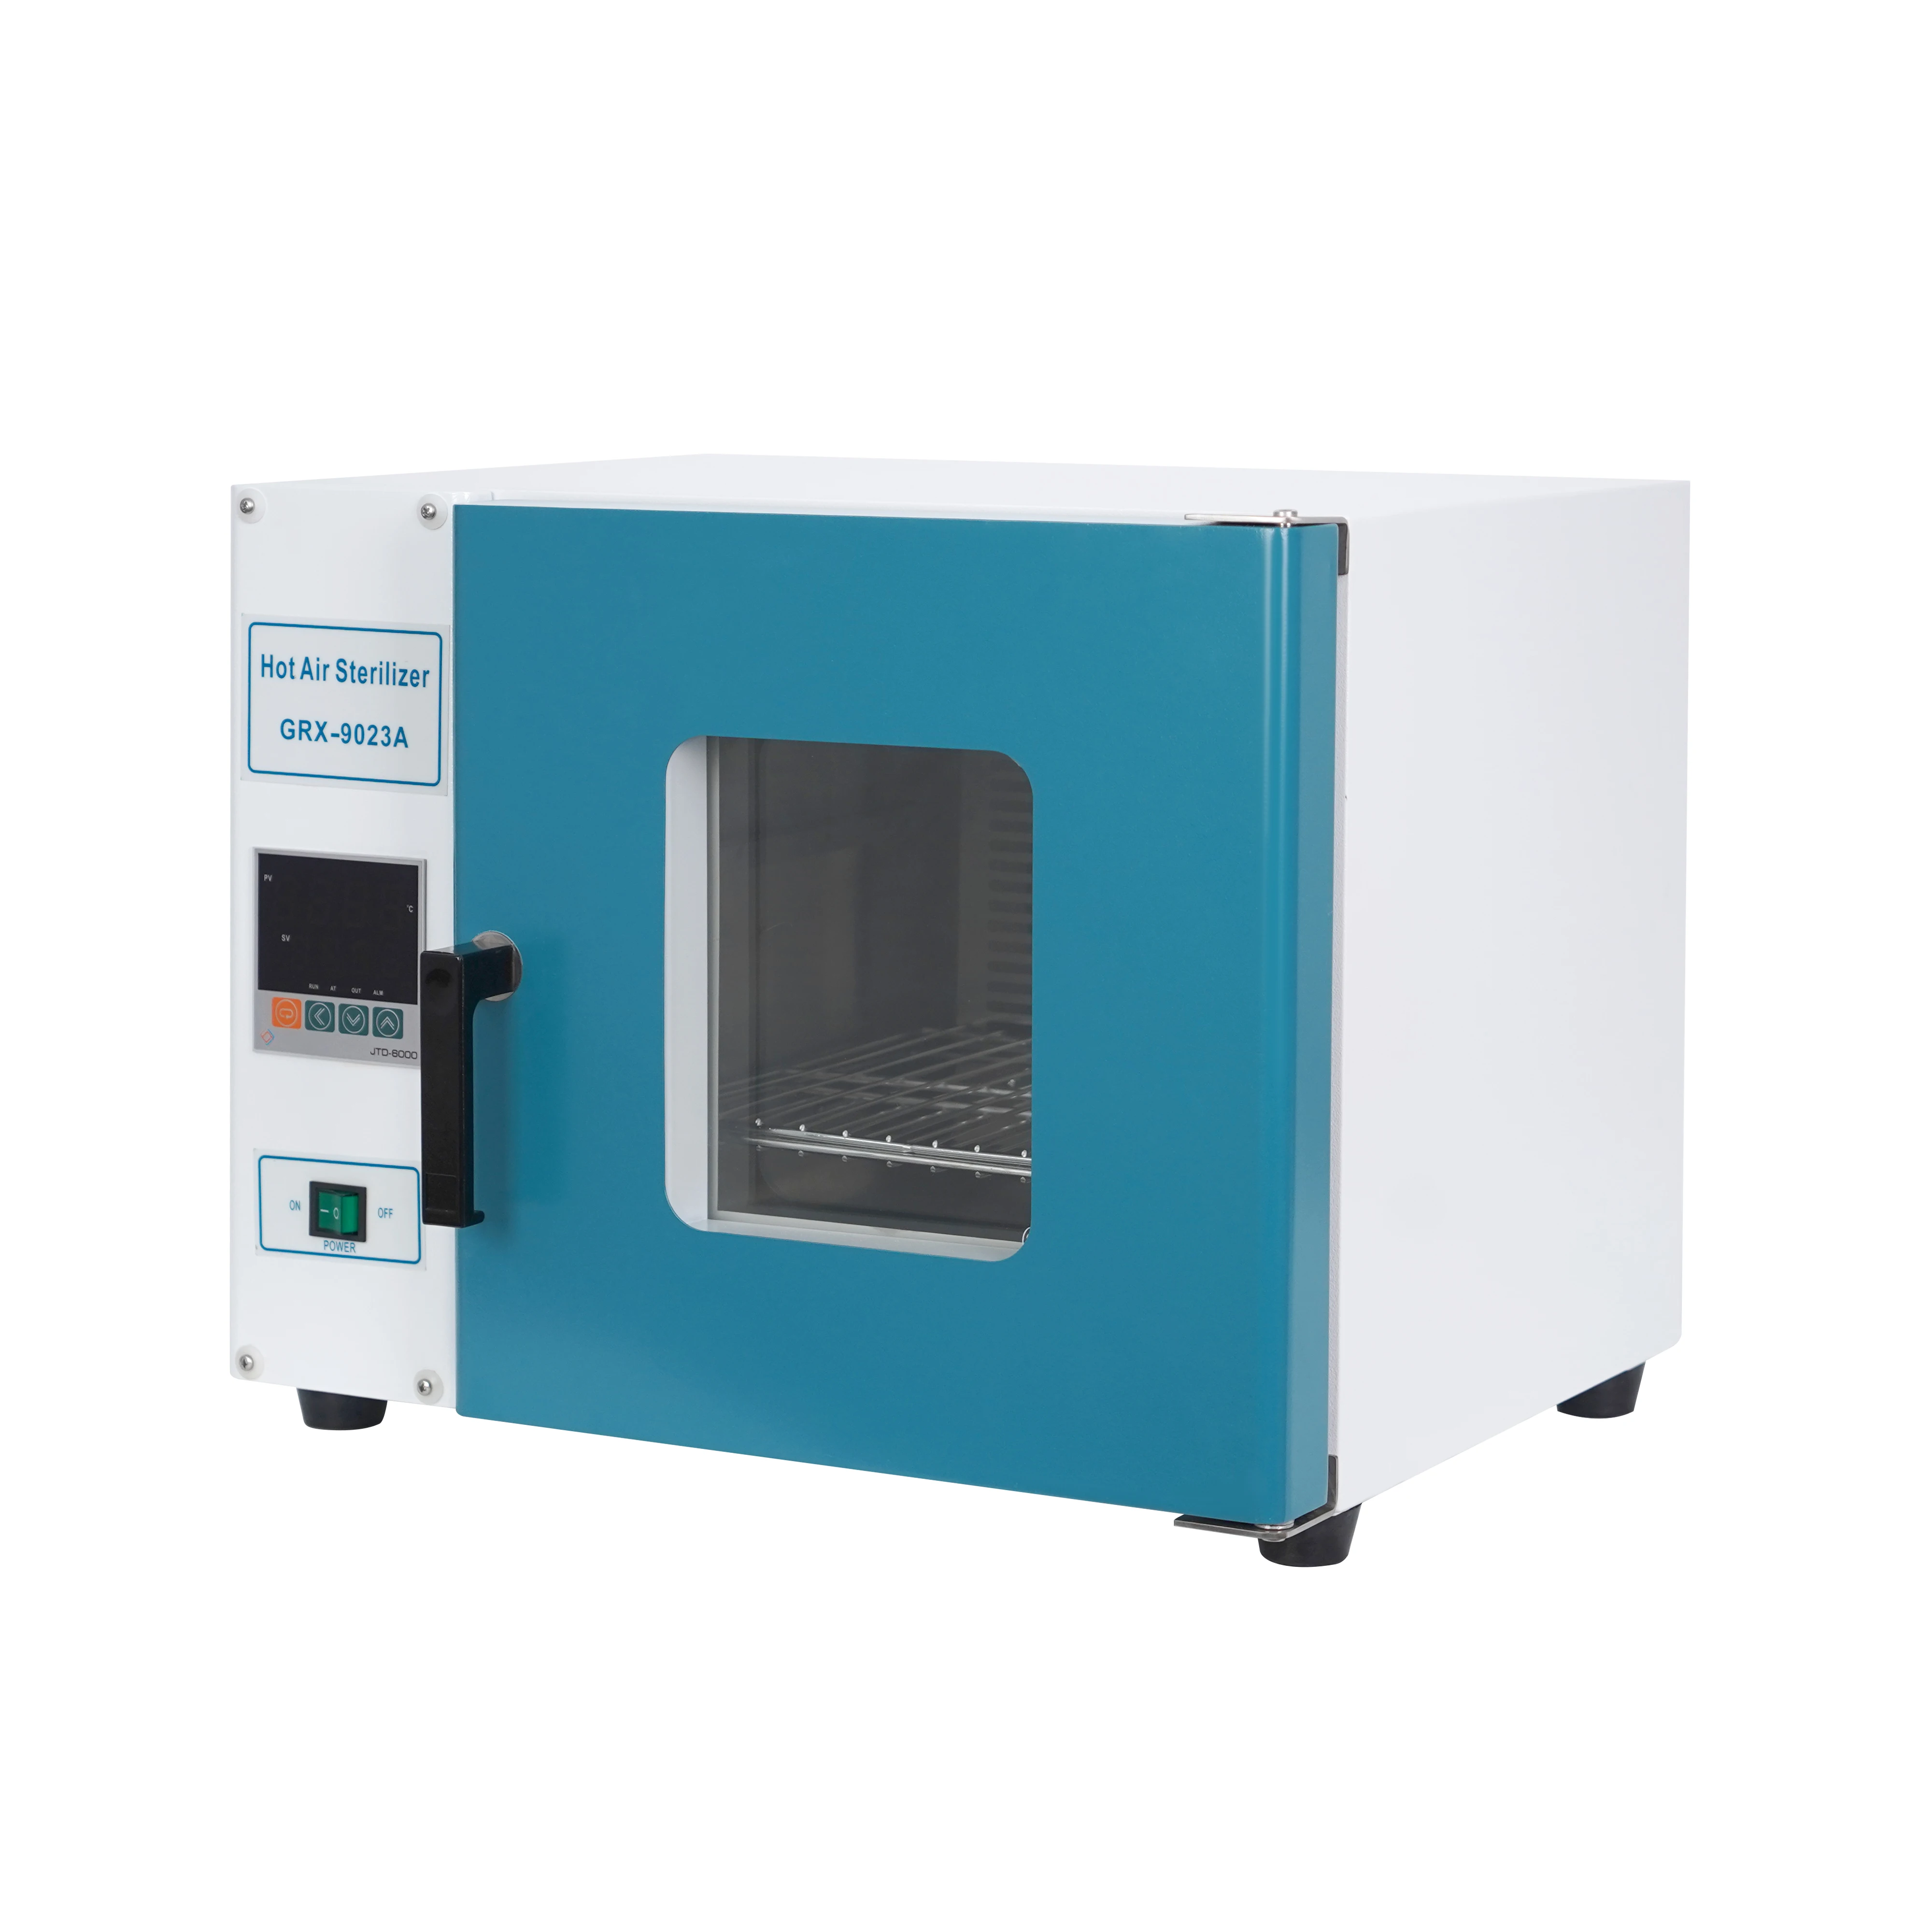 drying oven 500 ℃ 400 ℃ High temperature oven Constant temperature  industrial oven High temperature test oven manufacturer - AliExpress